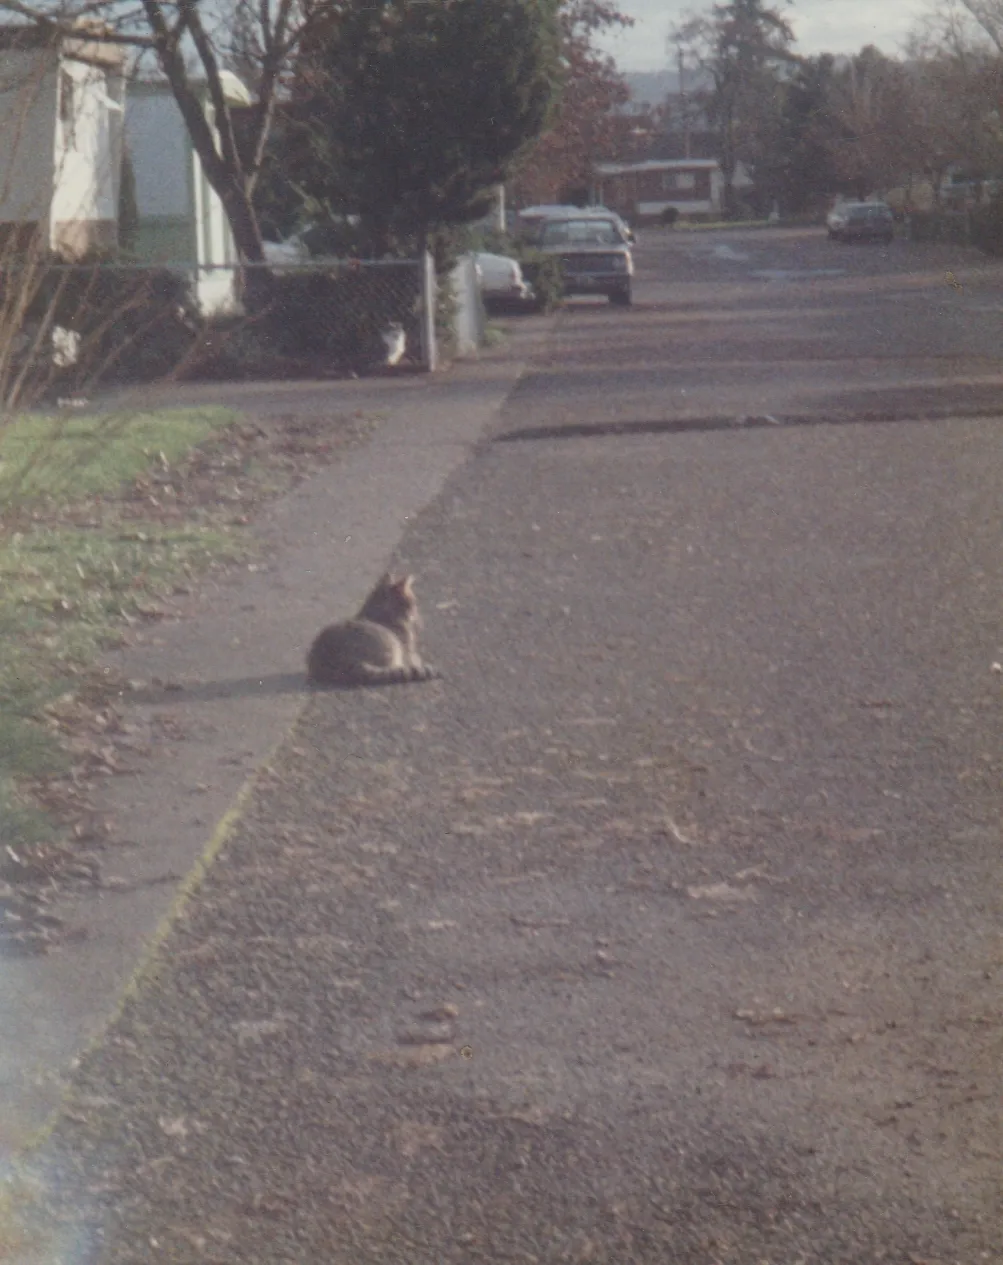 1990's maybe - a cat - our street and towards the mailboxes.jpg